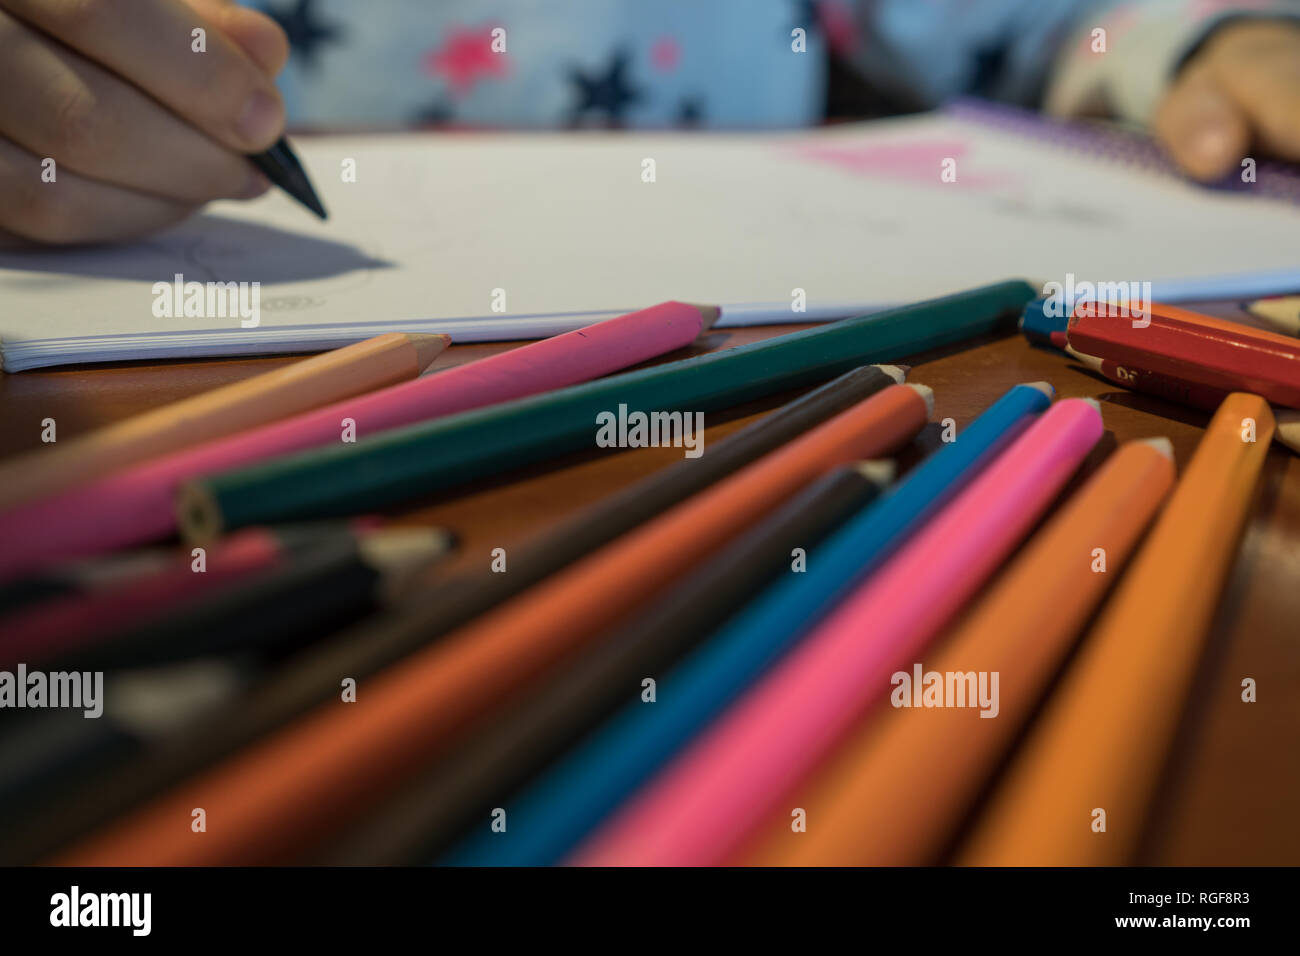 https://c8.alamy.com/comp/RGF8R3/colored-pencils-and-markers-scattered-on-the-table-RGF8R3.jpg